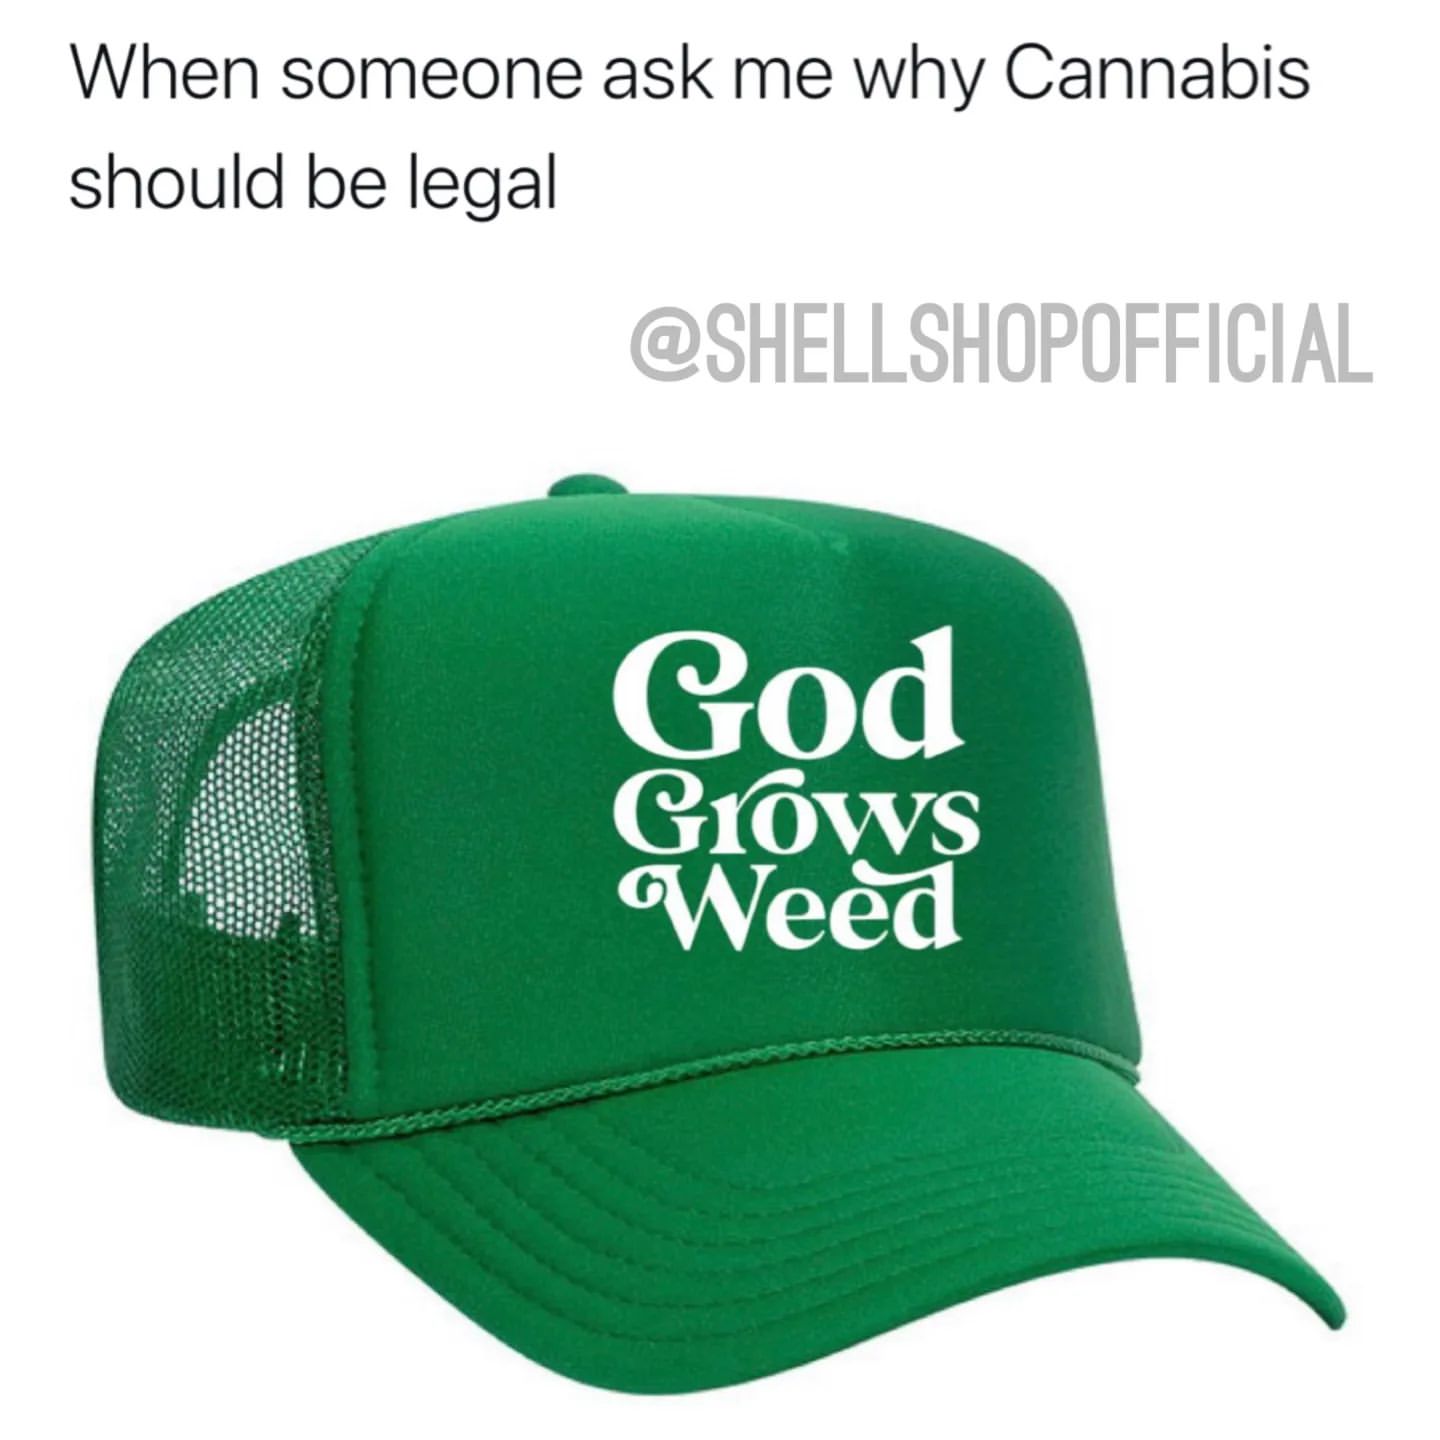 When someone ask me why Cannabis should be legal.  God grows weed.